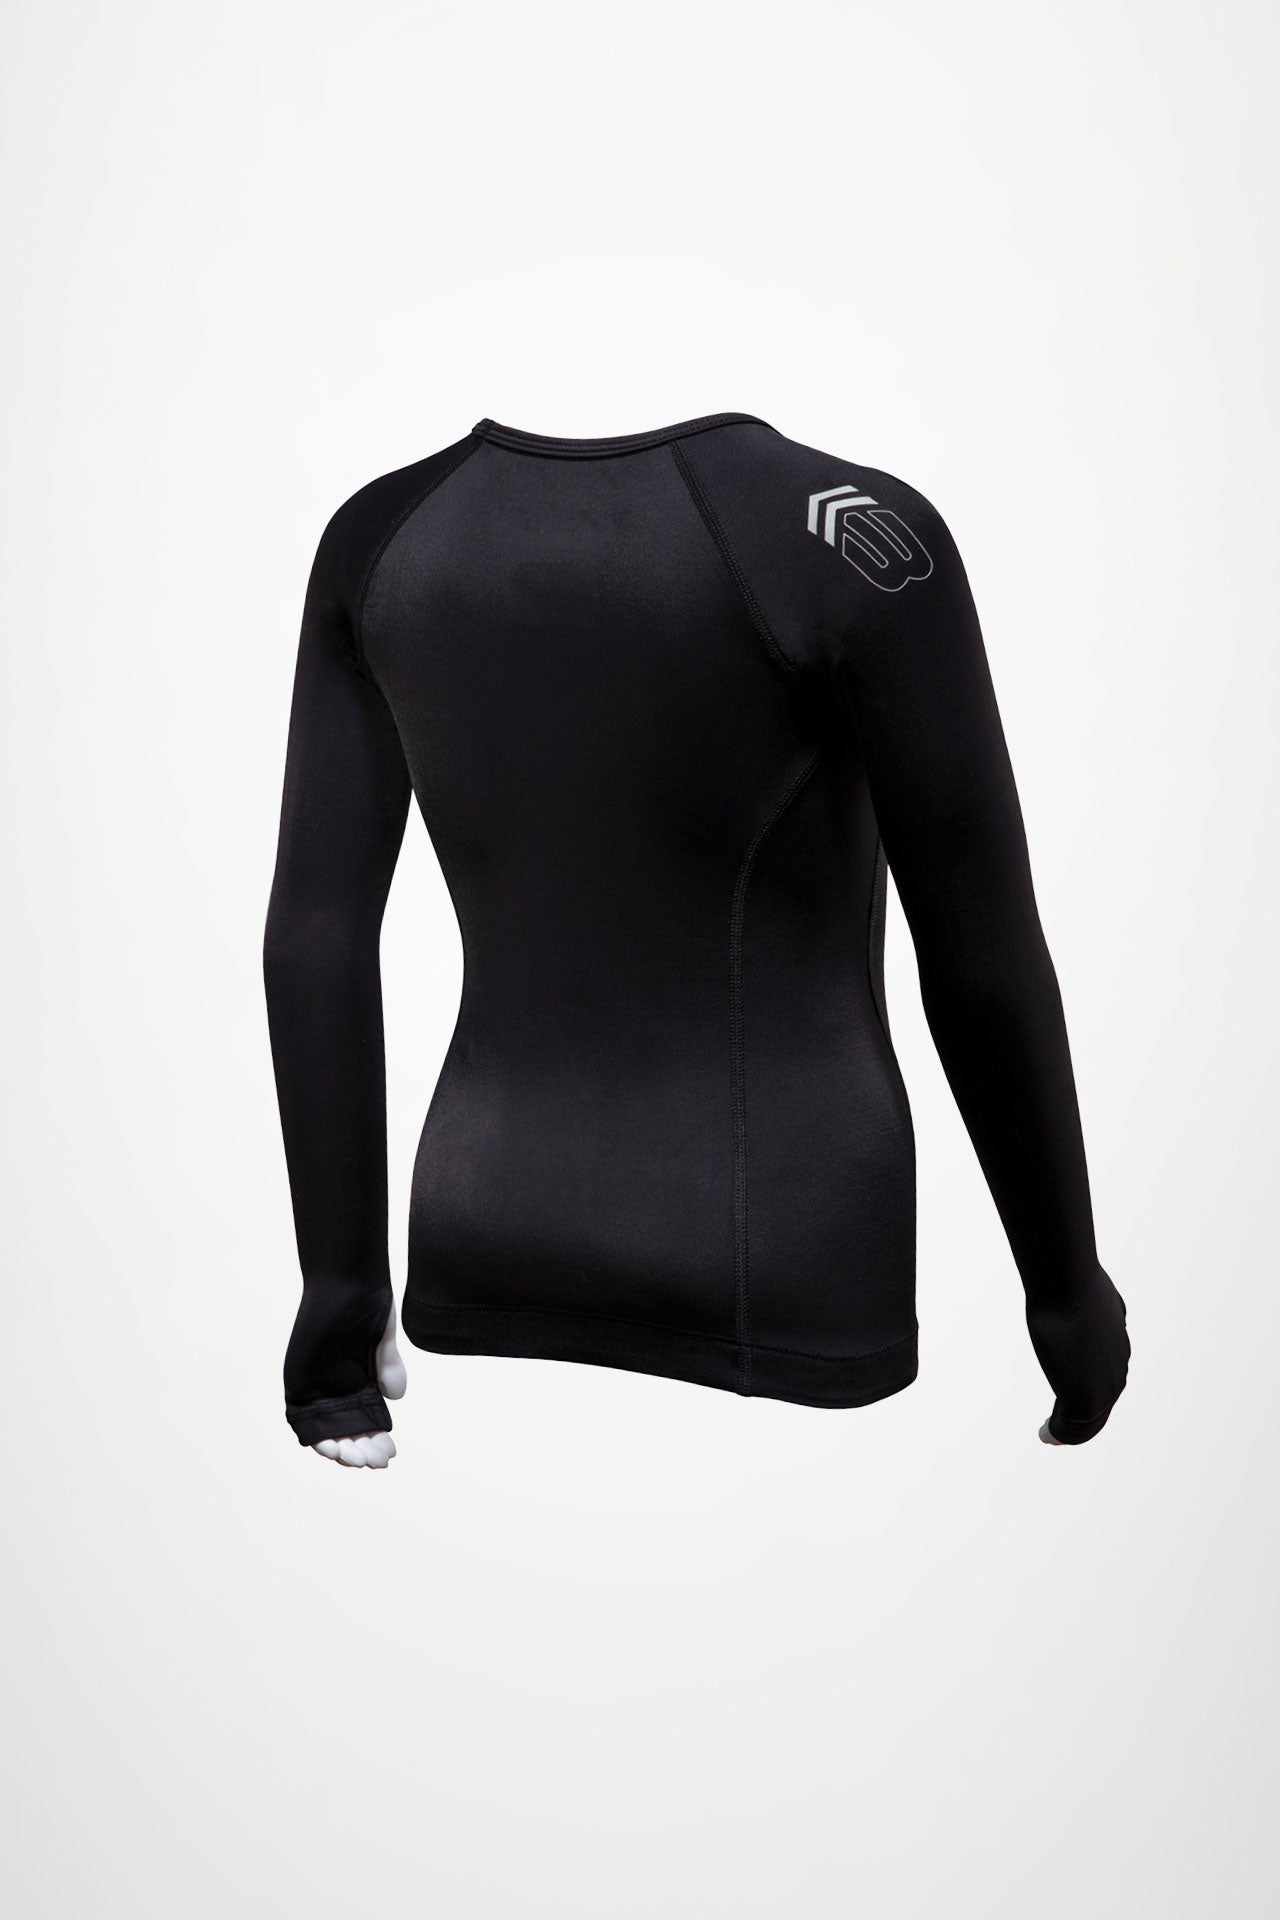 BASE Tee BASE Youth ACTIVE LS Compression Tee - Black